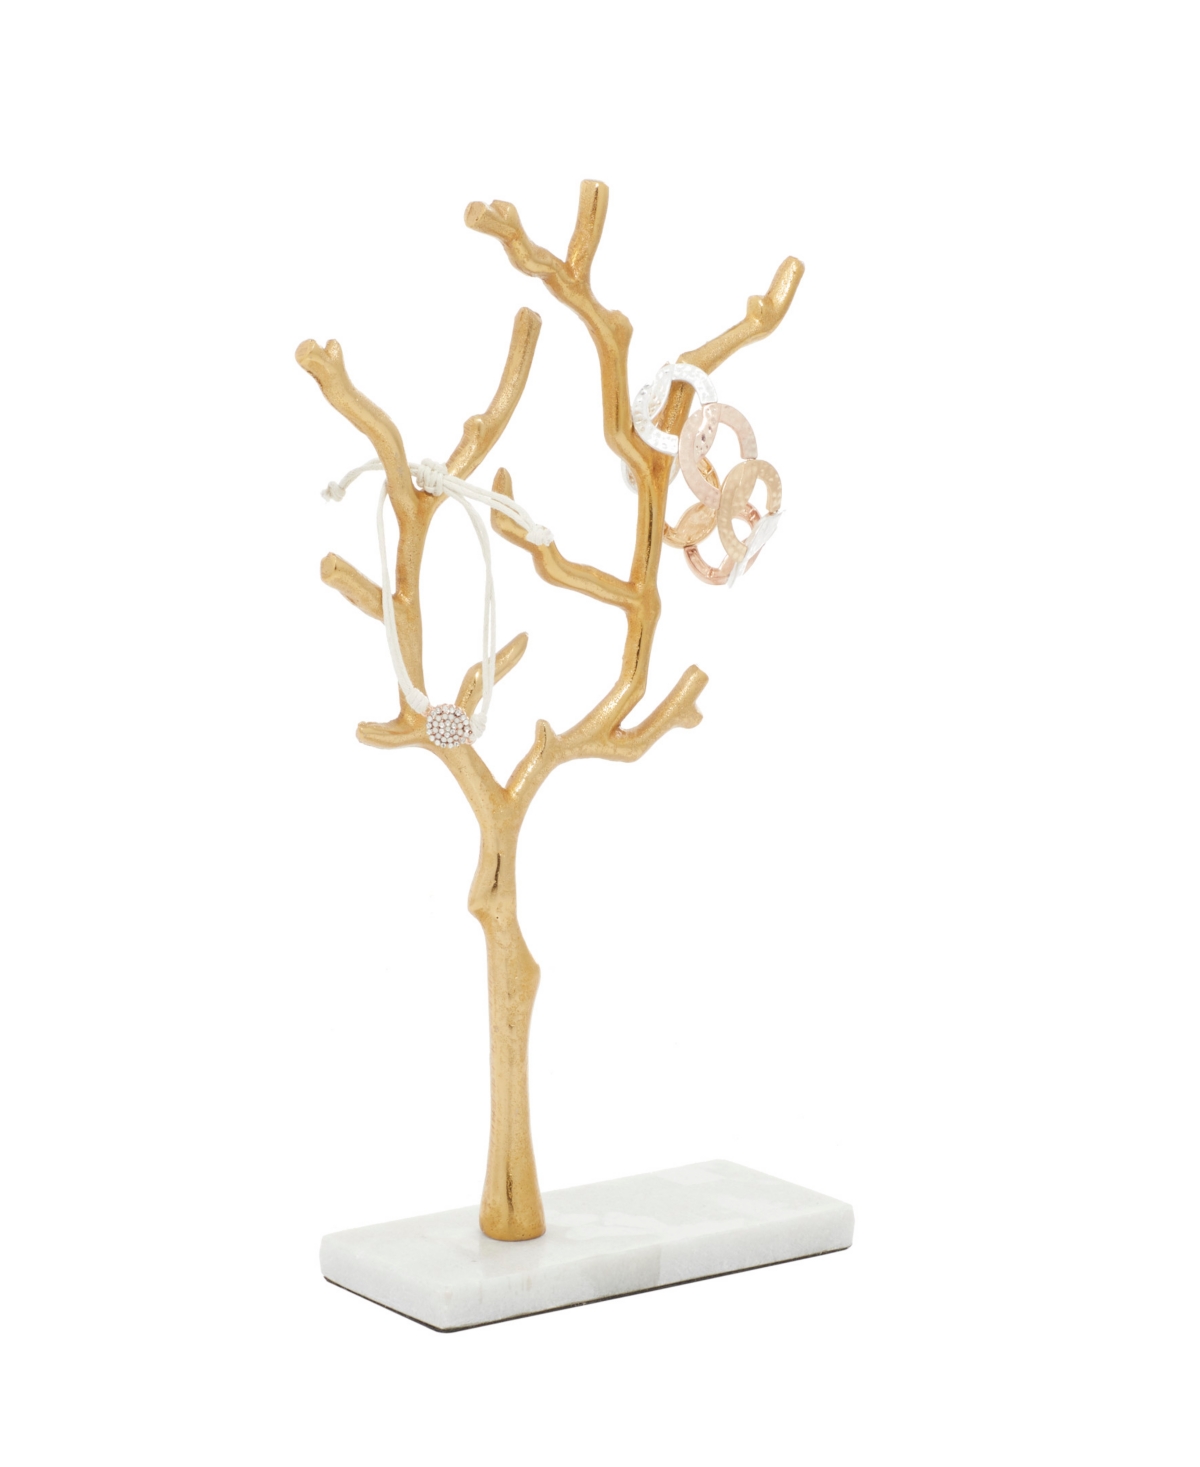 Real Marble Tree Jewelry Stand with Rectangular Base, 9" x 3" x 13" - Gold